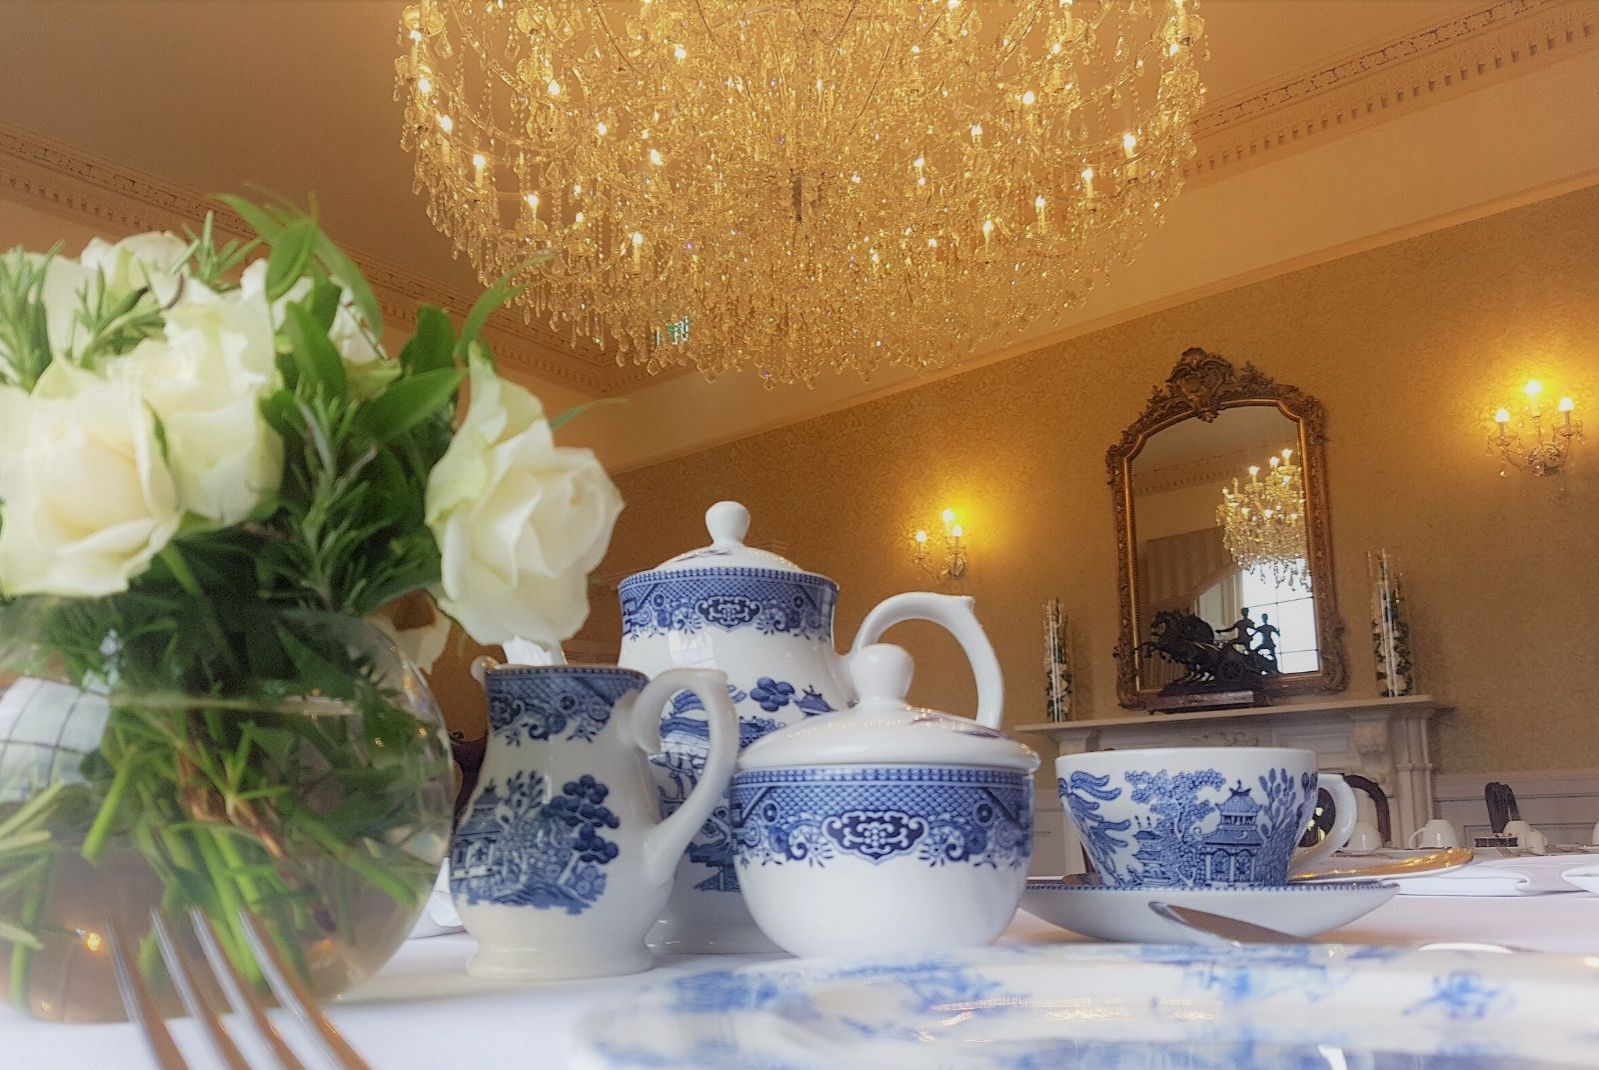 Afternoon Tea at Rockhill House country house hotel Letterkenny Donegal Ireland (4)